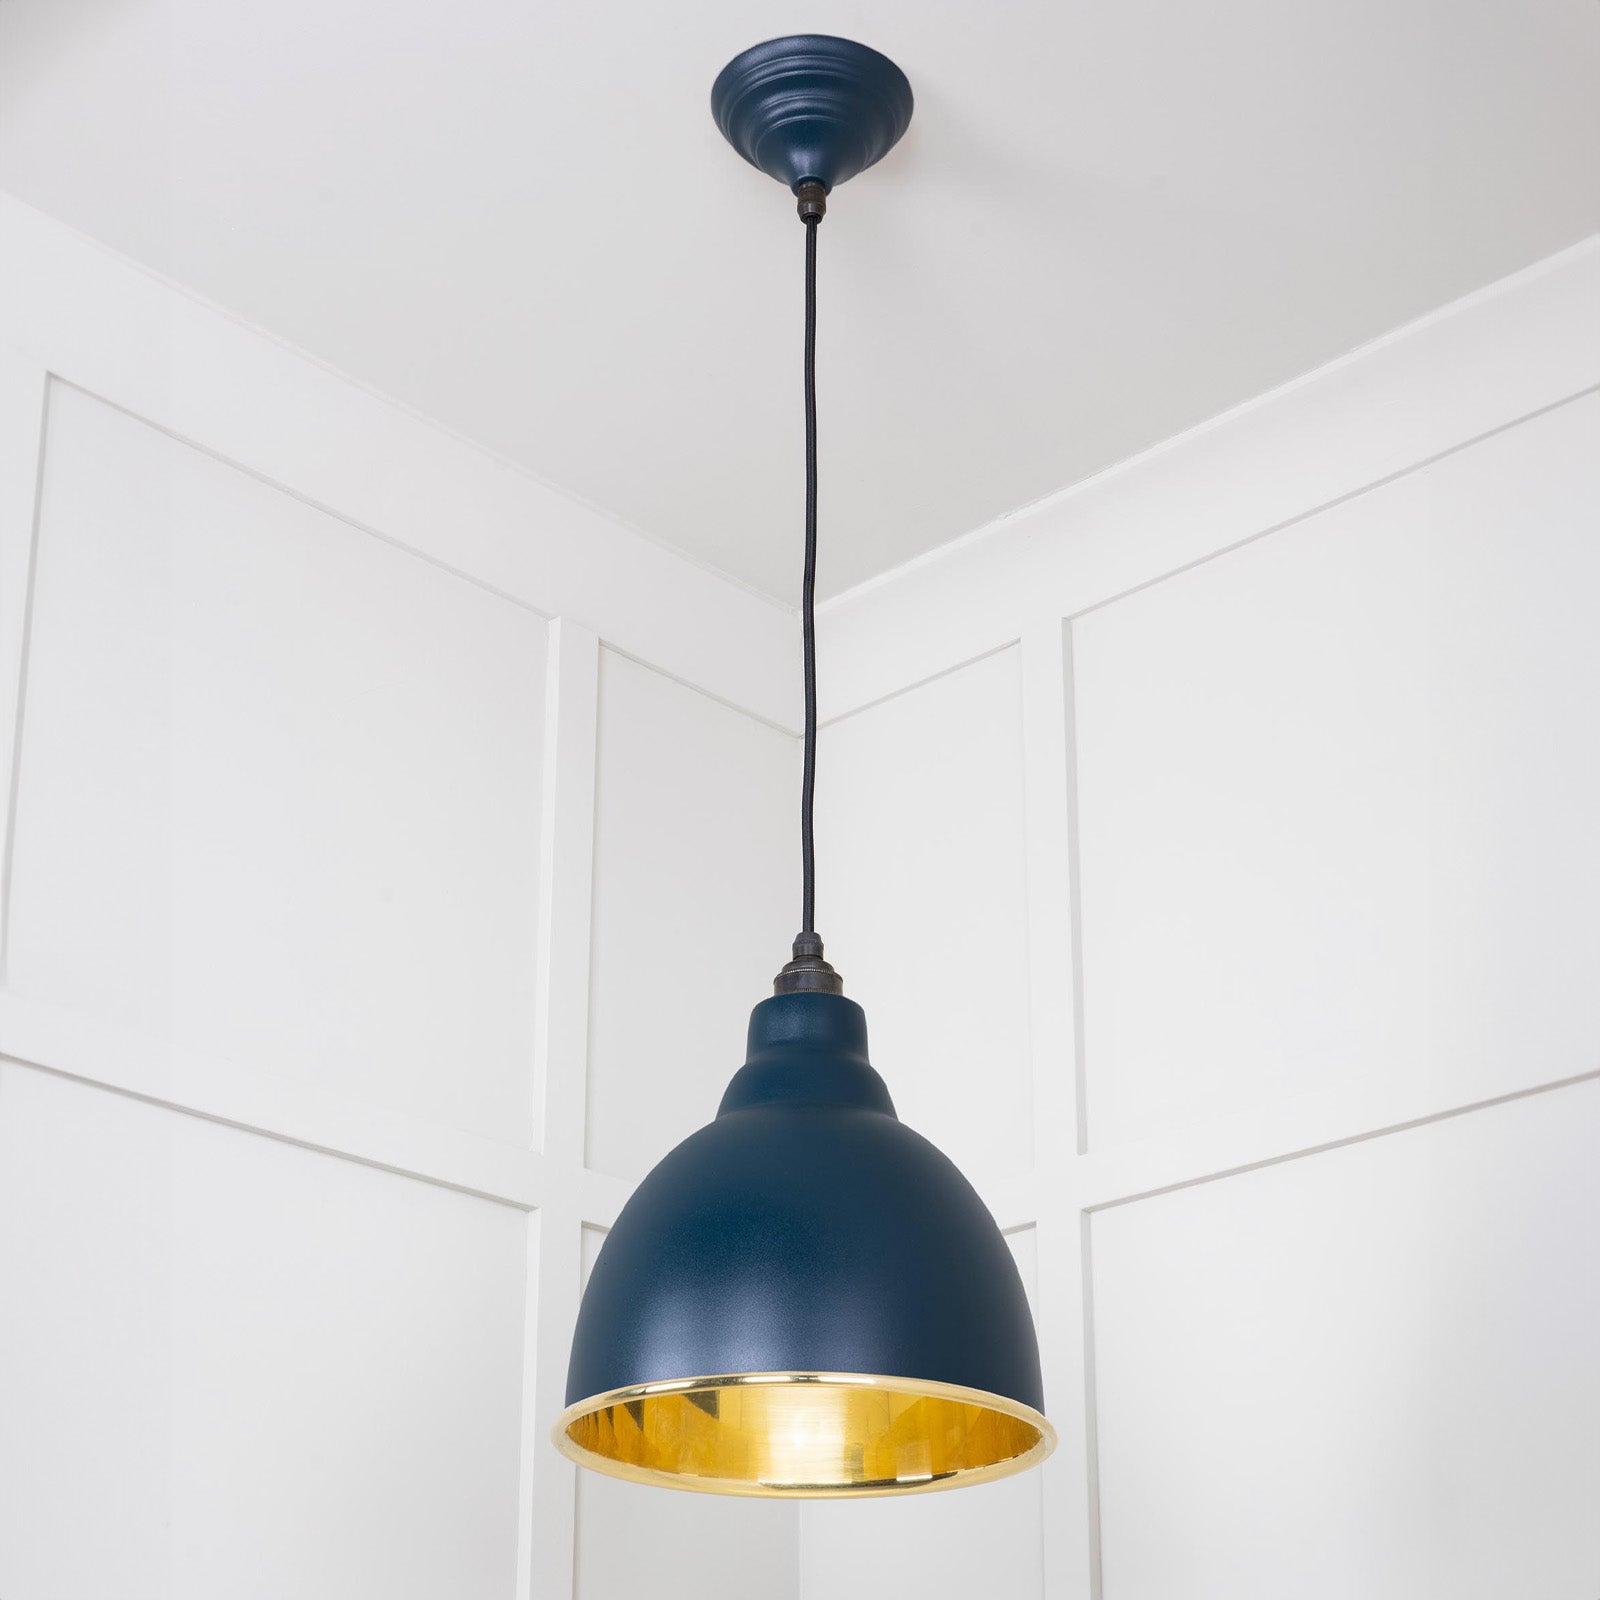 SHOW Full Image of Hanging Brindley Ceiling Light in Dusk